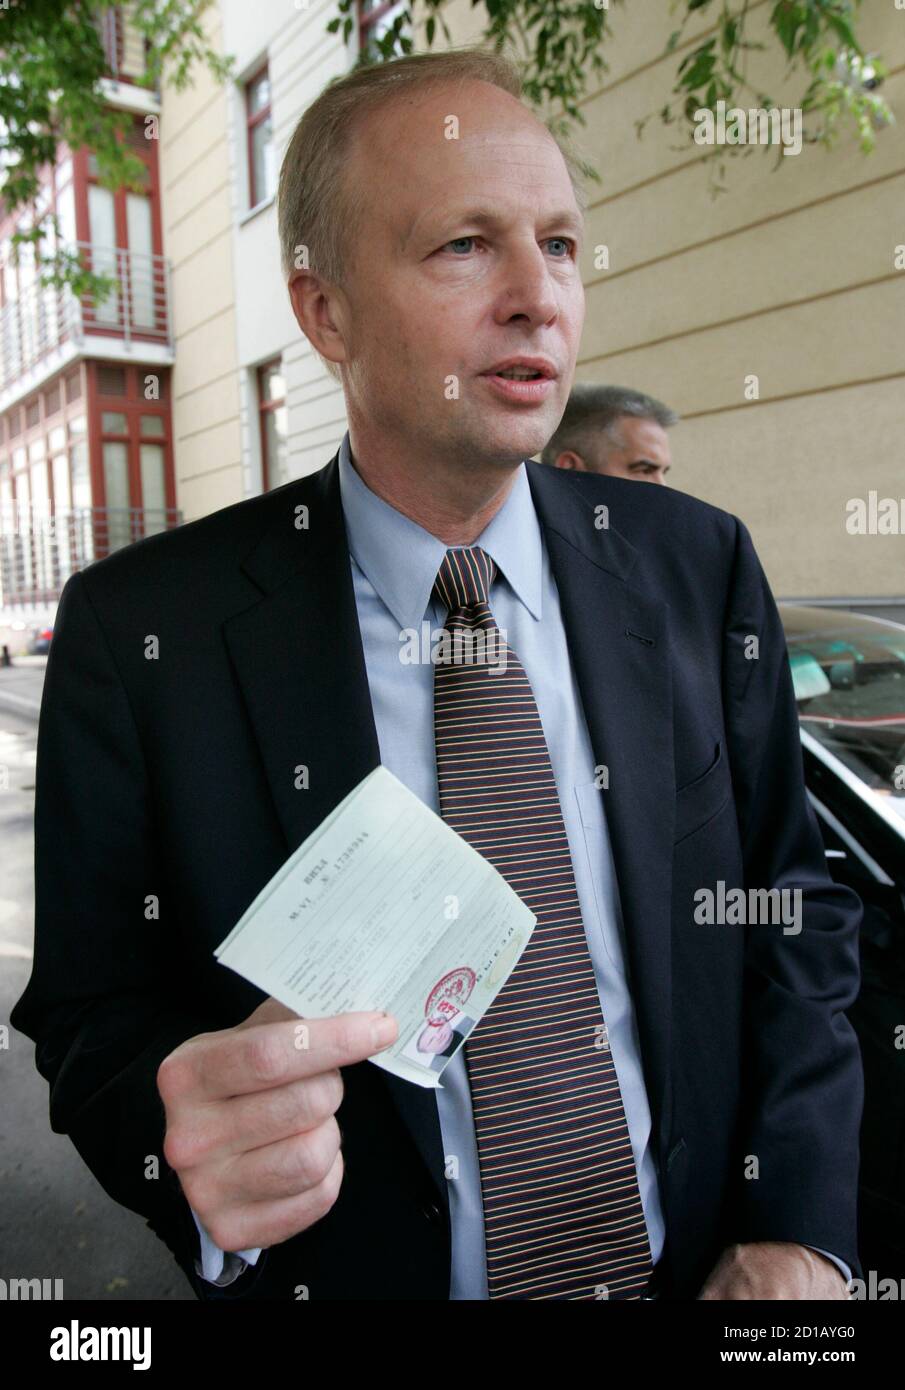 The head of Russian embattled oil firm TNK-BP Robert Dudley speaks to the media holding his visa in central Moscow July 18, 2008. Dudley failed on Friday to get his Russian visa renewed but was allowed to stay for 10 more days and said he was optimistic he would get it. REUTERS/Alexander Natruskin  (RUSSIA) Stock Photo